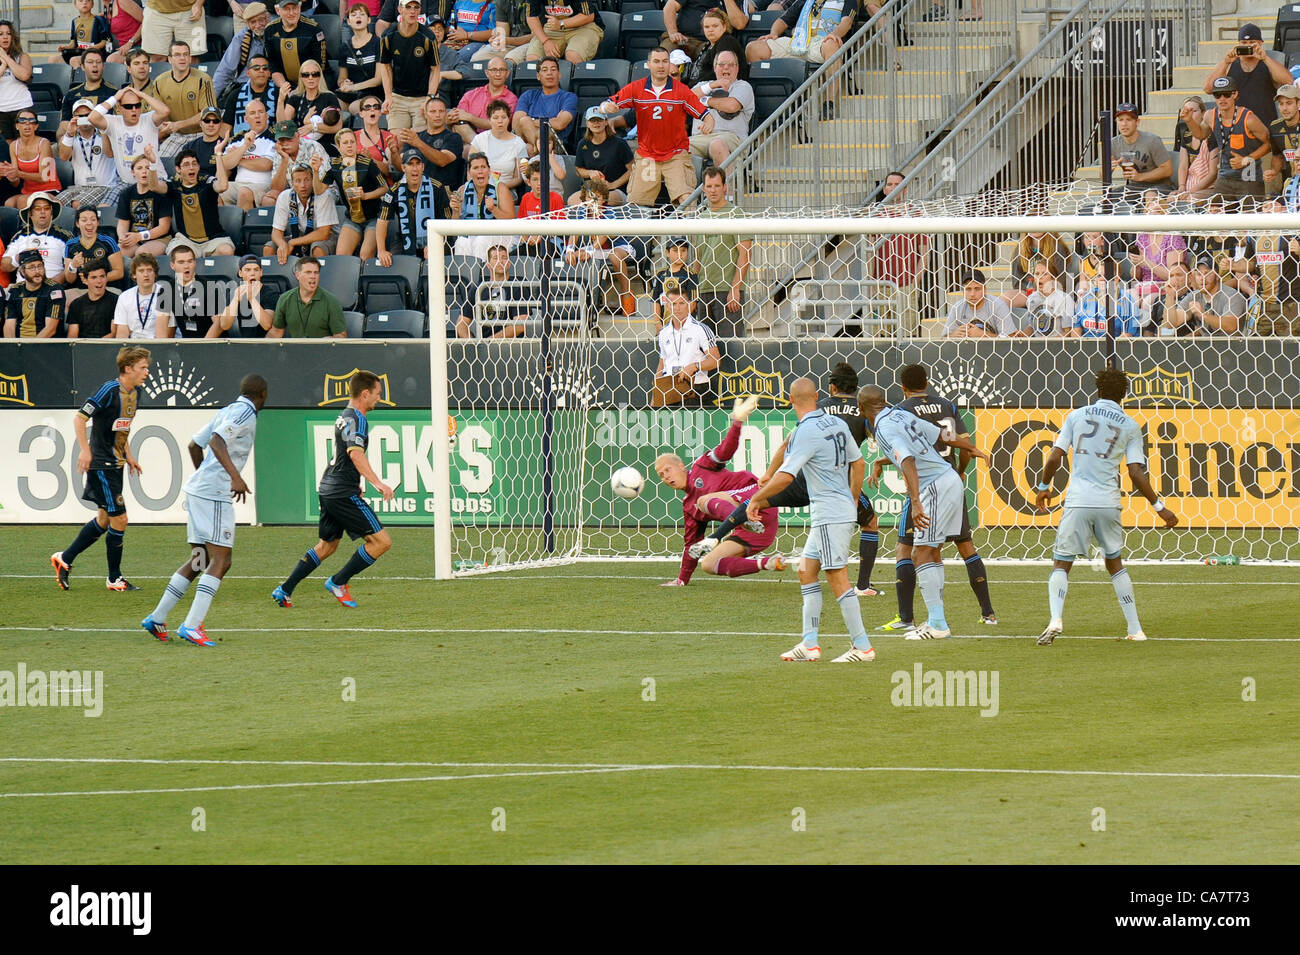 Philadelphia, USA. 23 June, 2012. Philadelpia Union forward Jack McInerney scores the 2nd of his two goals during a professional MLS soccer / football match against the Sporting KC of Kansas City. Stock Photo